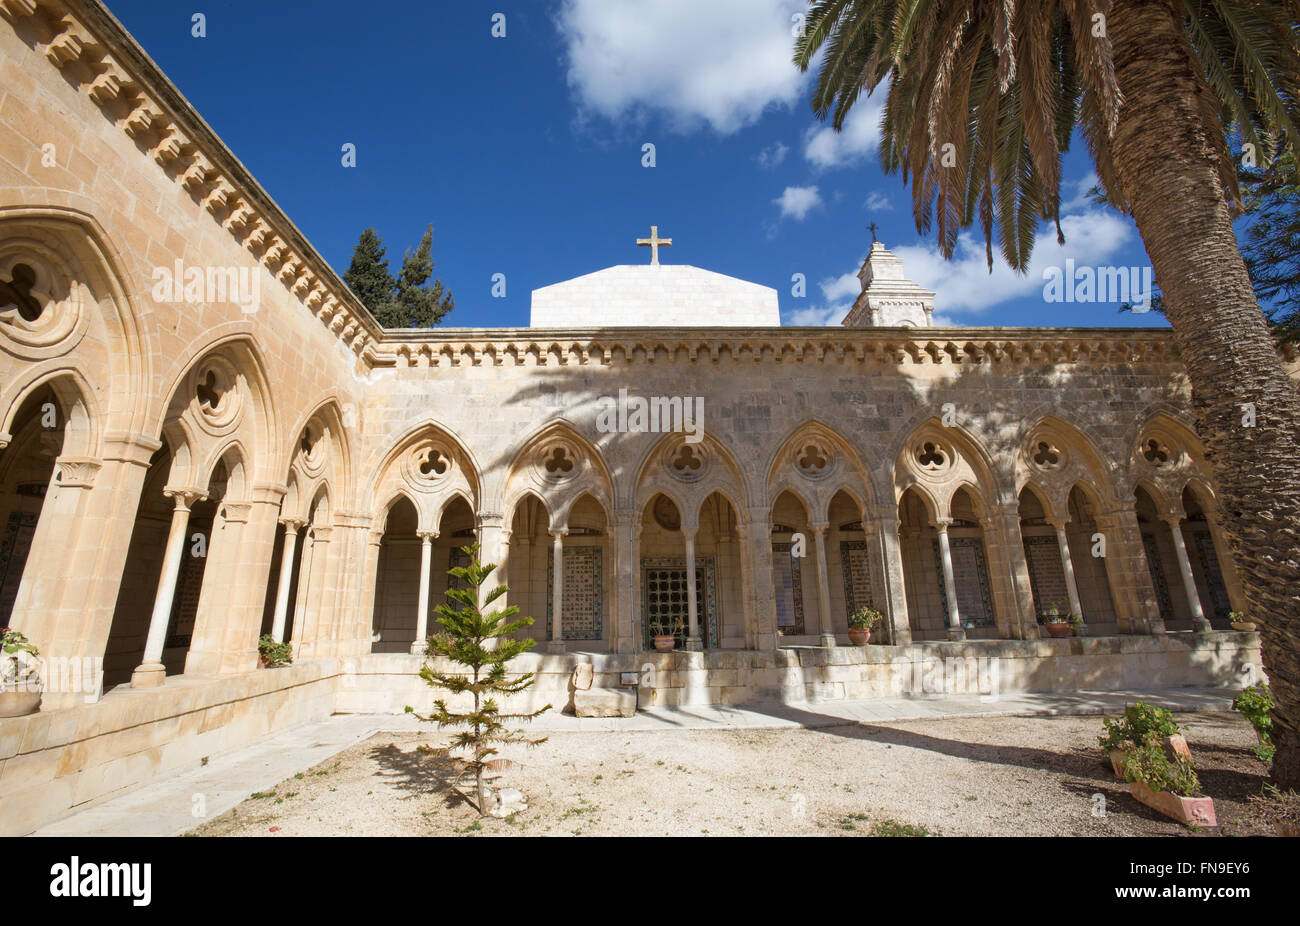 JERUSALEM, ISRAEL - MARCH 3, 2015: The gothic corridor of atrium in Church of the Pater Noster on Mount of Olives. Stock Photo